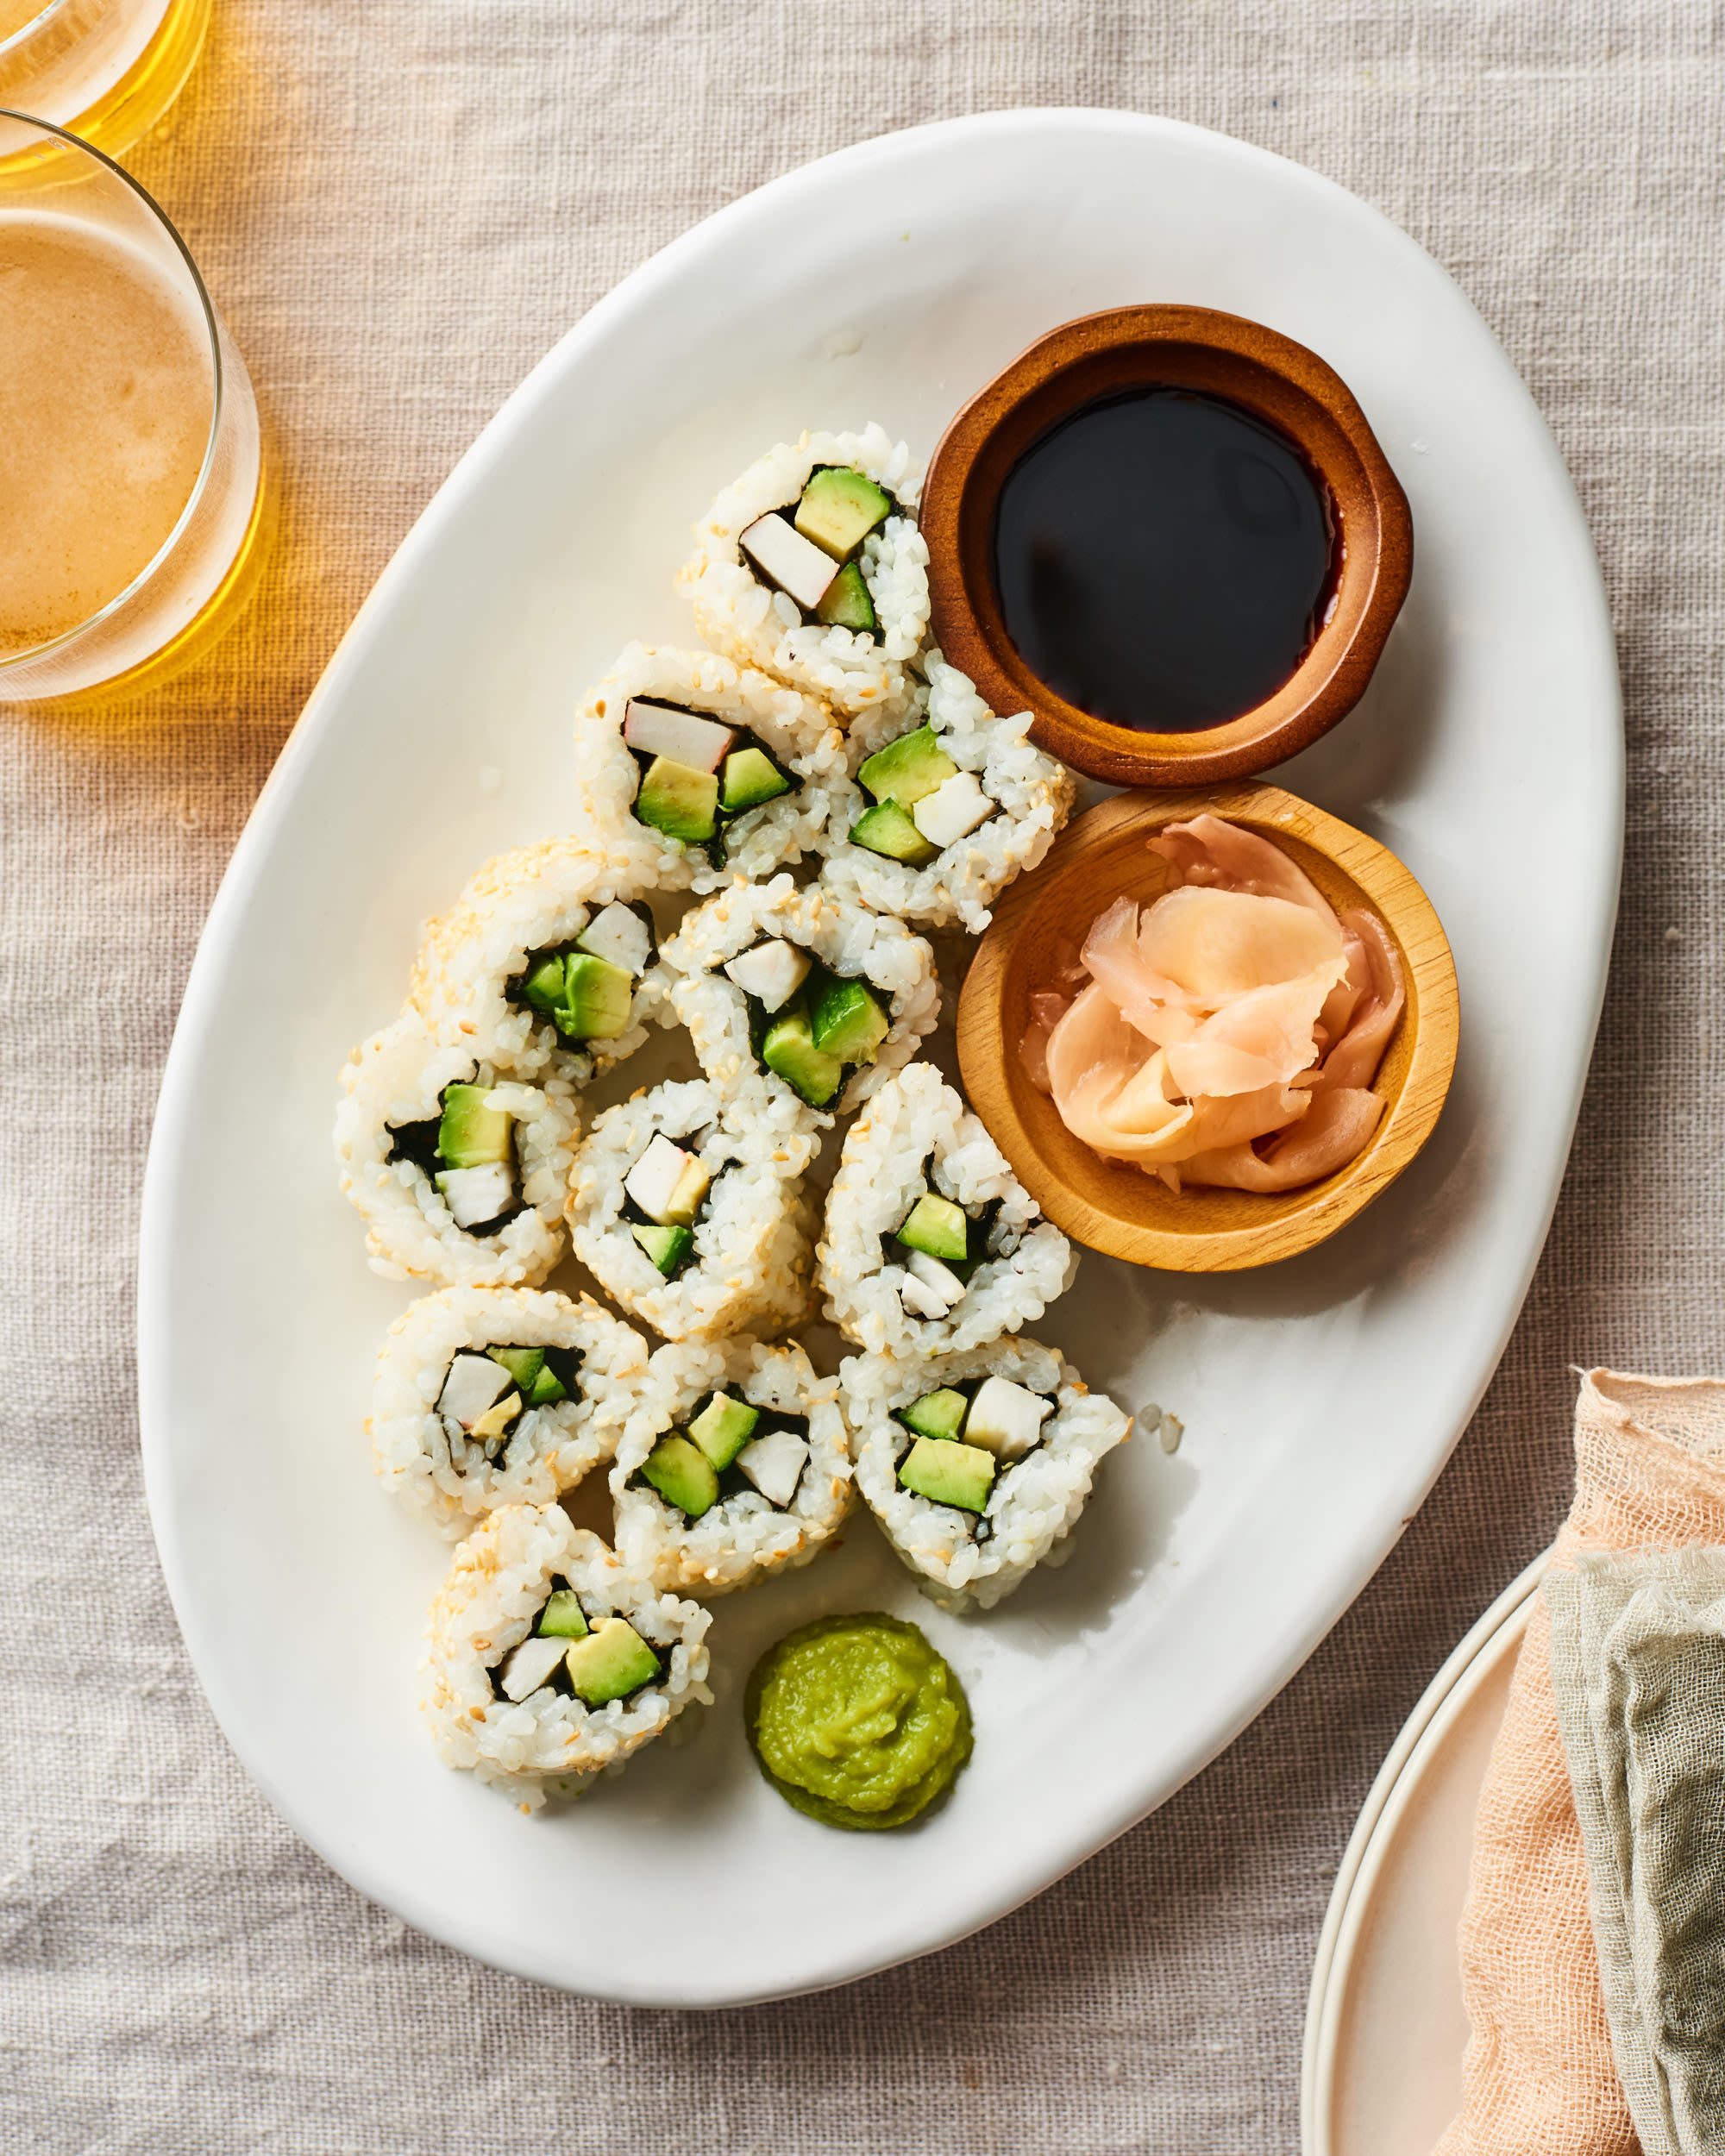 https://cdn.apartmenttherapy.info/image/upload/v1563823777/k/Photo/Recipes/2019-08-how-to-california-roll/2019-07-15_Kitchn77337_How-To-Make-Sushi.jpg